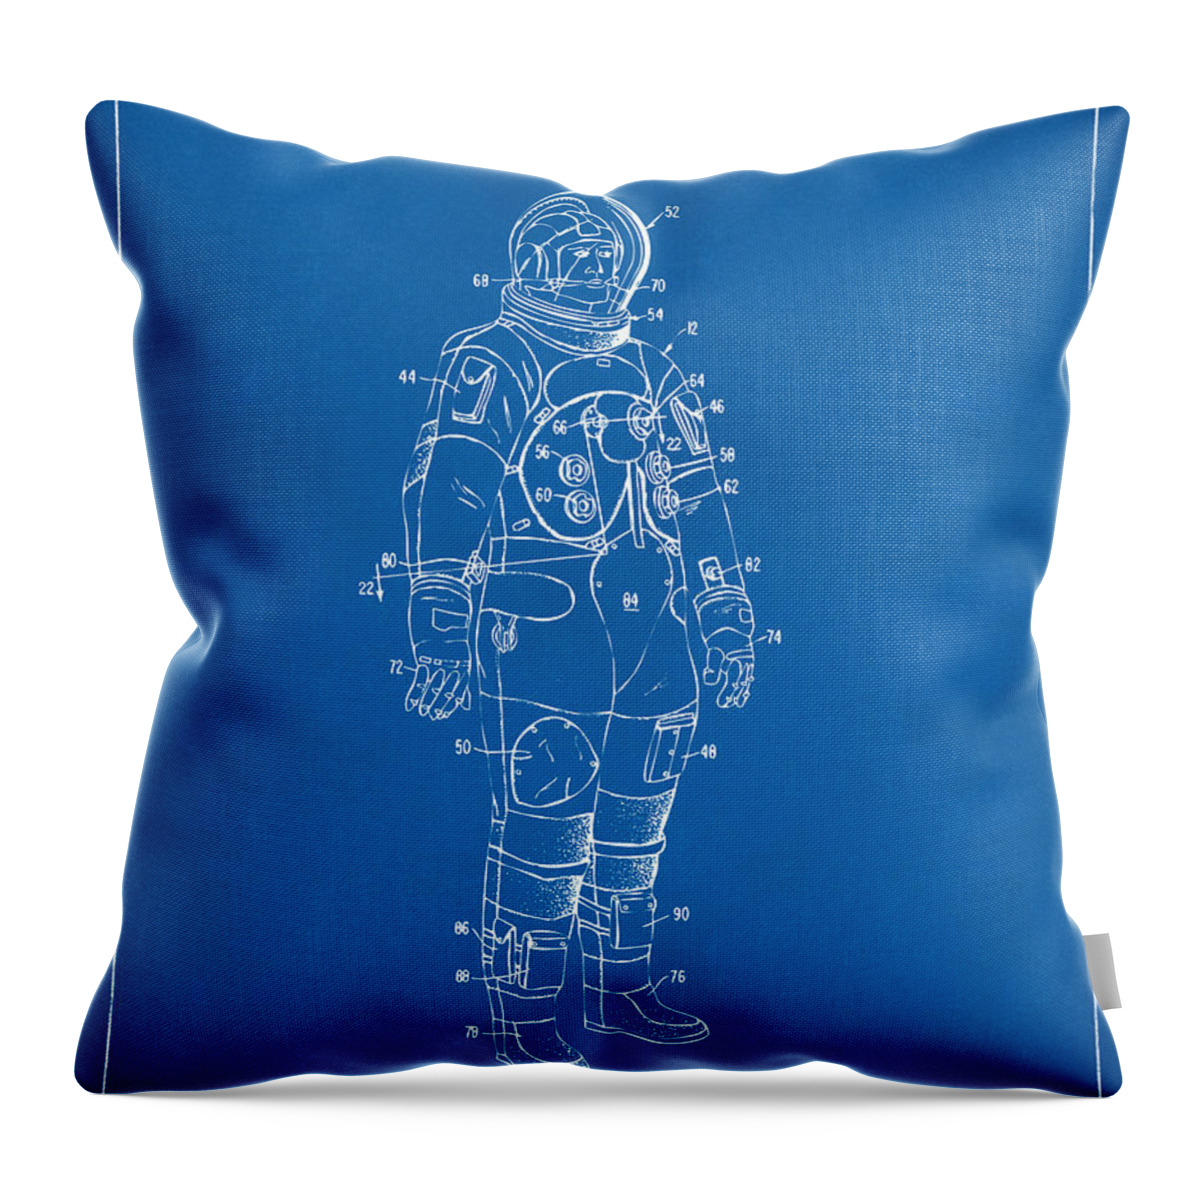 Space Suit Throw Pillow featuring the digital art 1973 Astronaut Space Suit Patent Artwork - Blueprint by Nikki Marie Smith